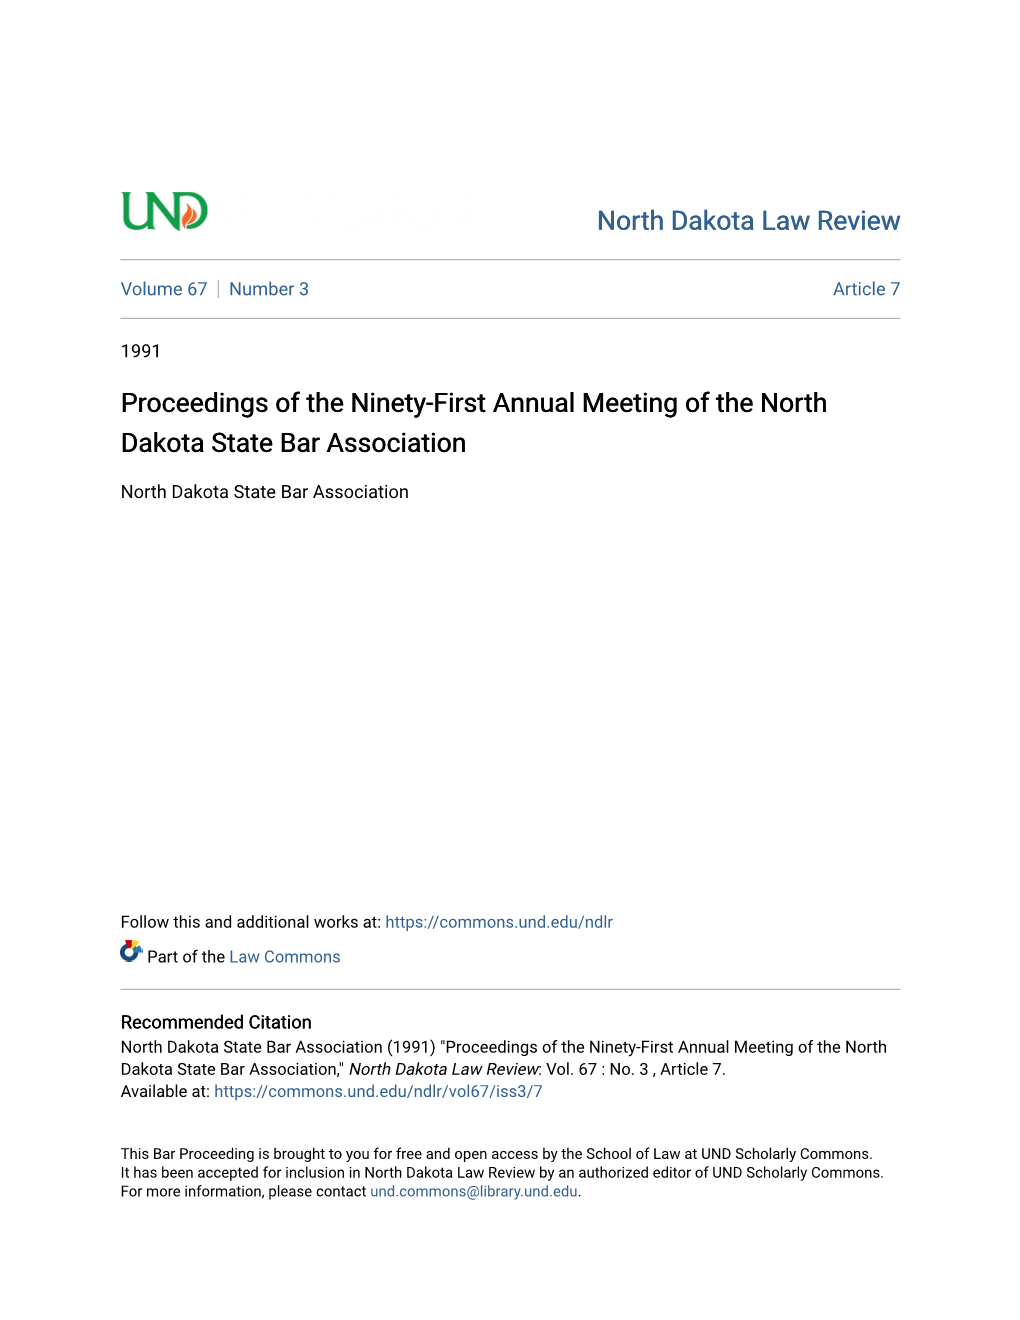 Proceedings of the Ninety-First Annual Meeting of the North Dakota State Bar Association